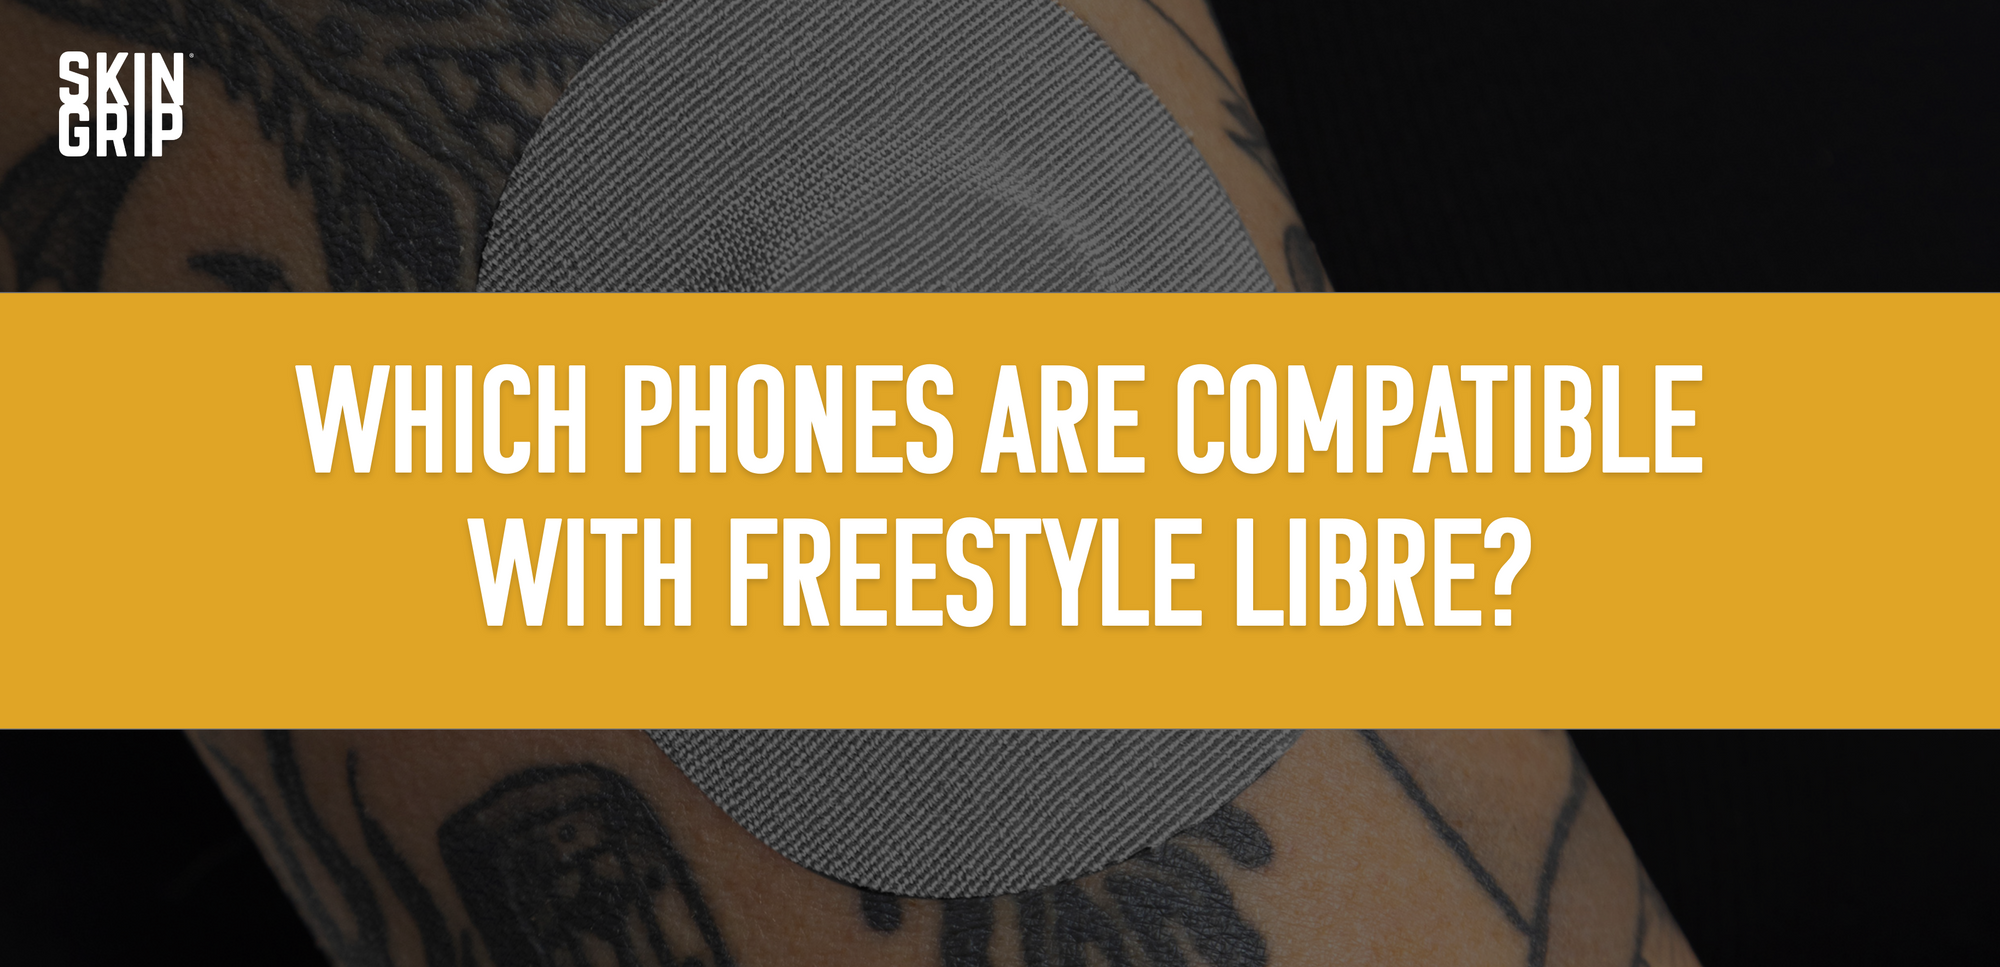 Freestyle Libre 3: Compatible Phones & Mobile Devices for Glucose Monitoring